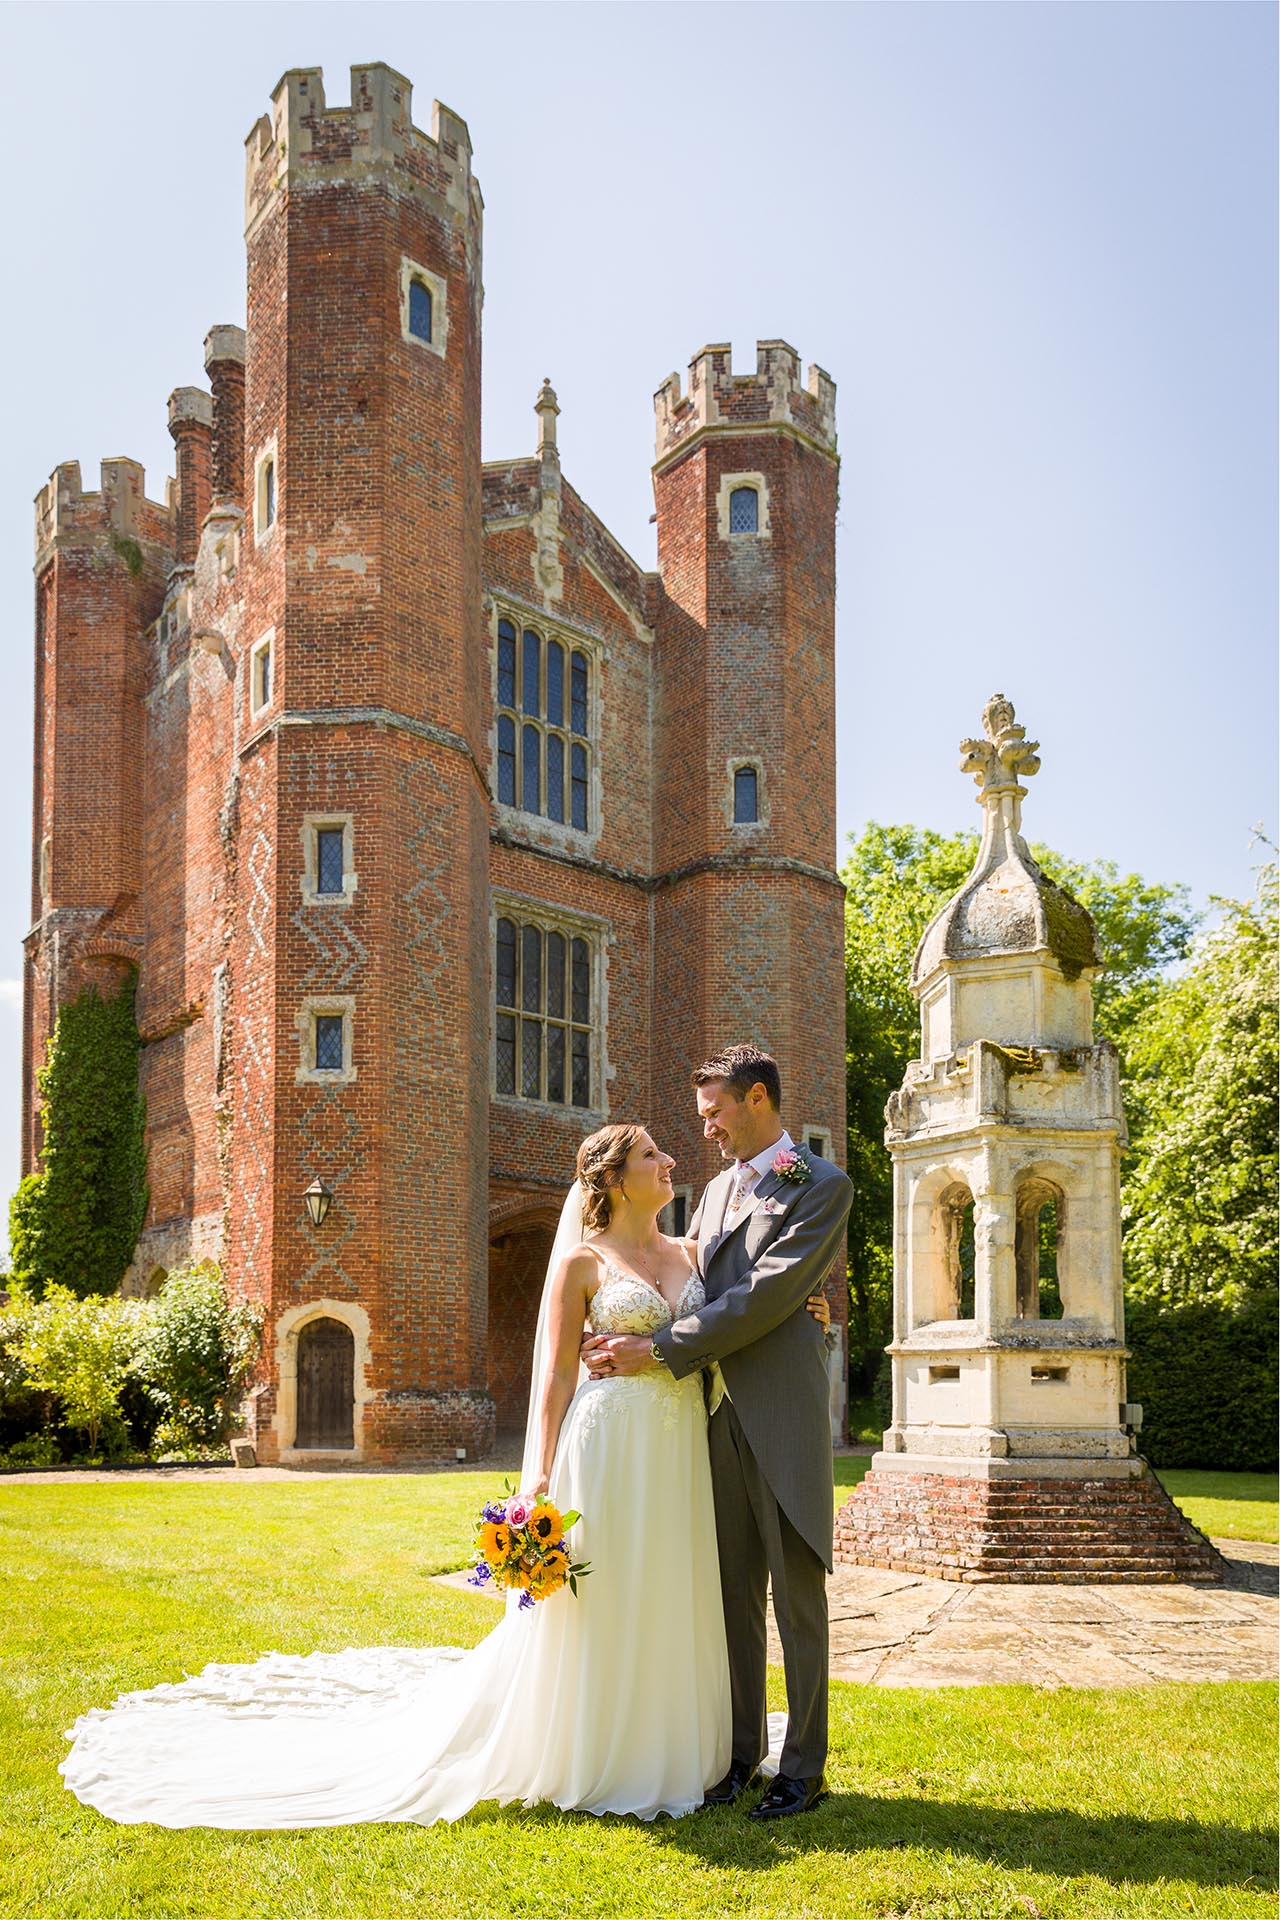 Bride and groom wedding portrait photography at Leez Priory, Great Leighs, Chelmsford, by Essex wedding photographer